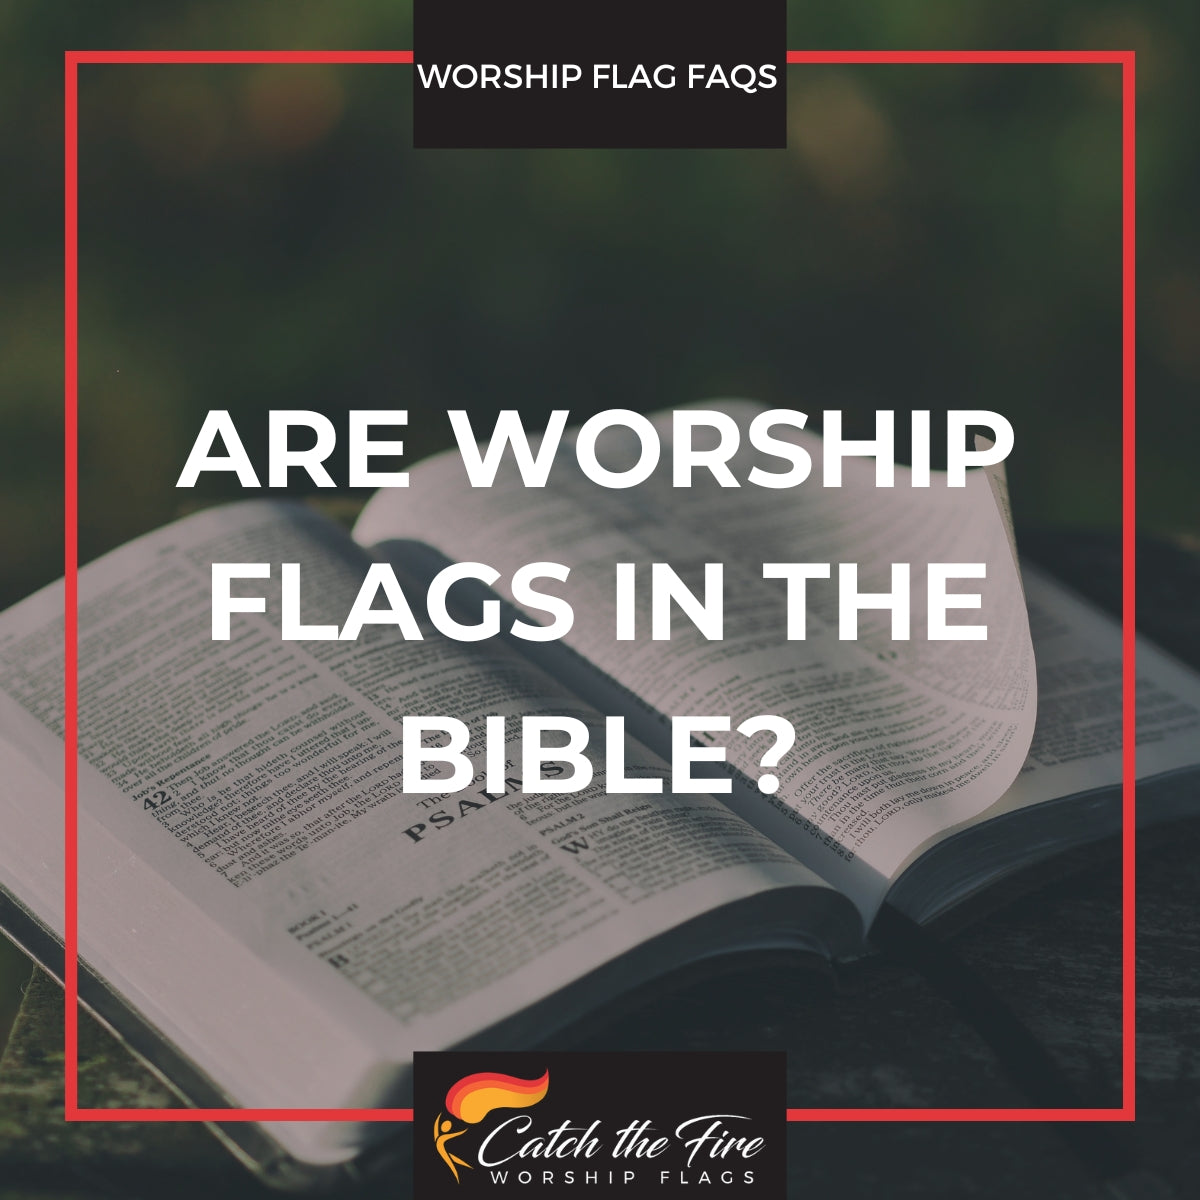 Are Worship Flags in the Bible?